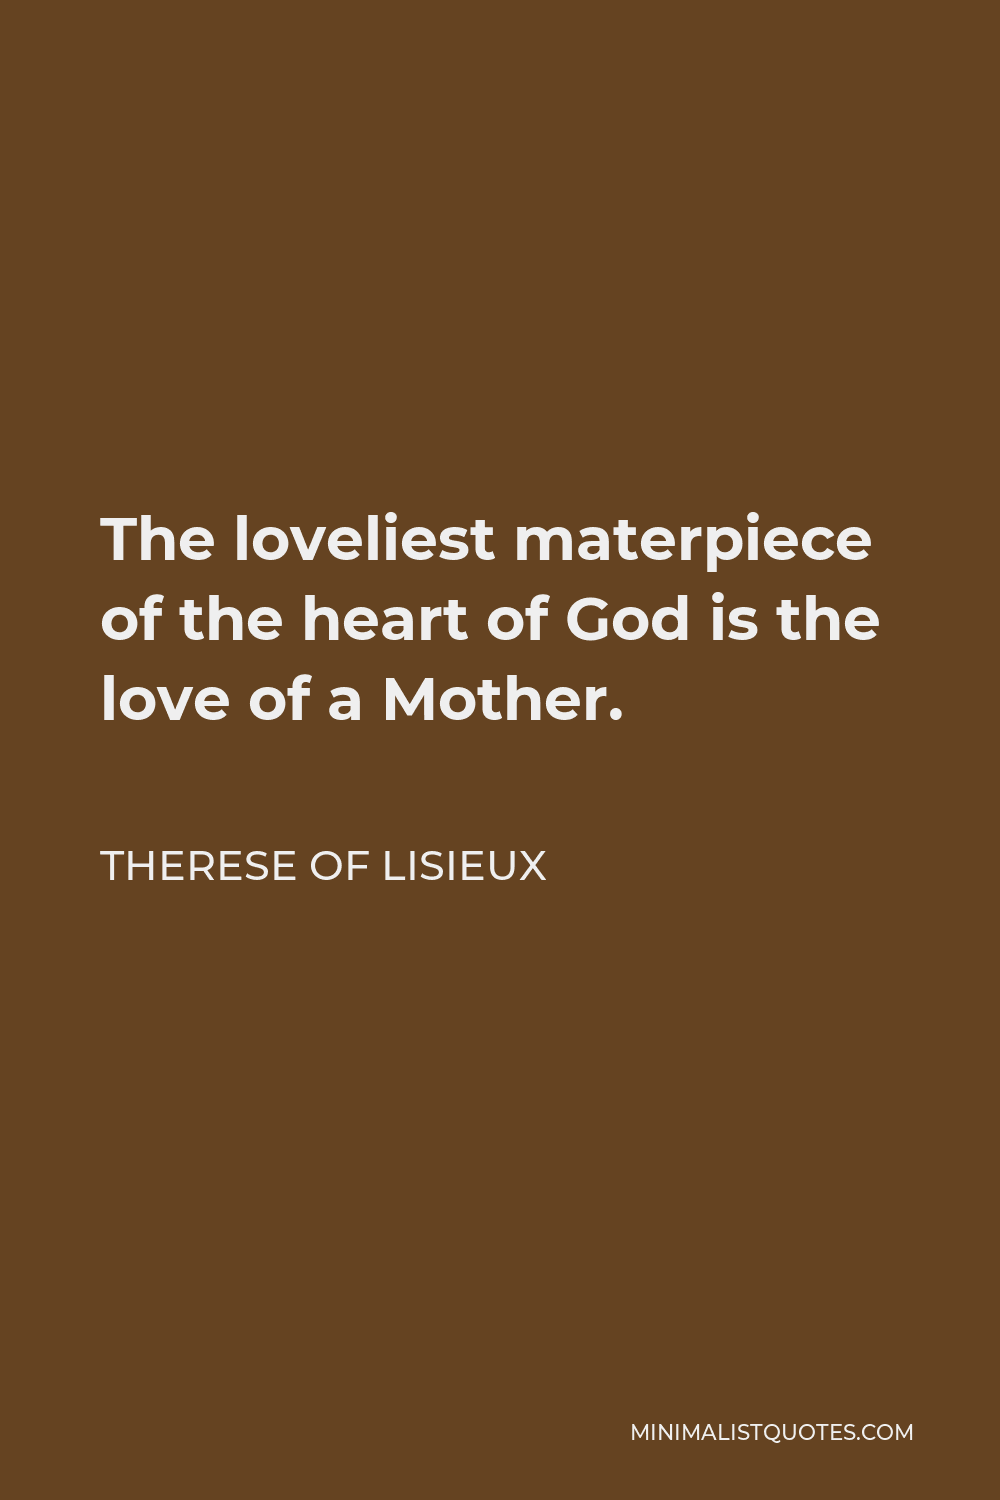 Therese of Lisieux Quote - The loveliest materpiece of the heart of God is the love of a Mother.